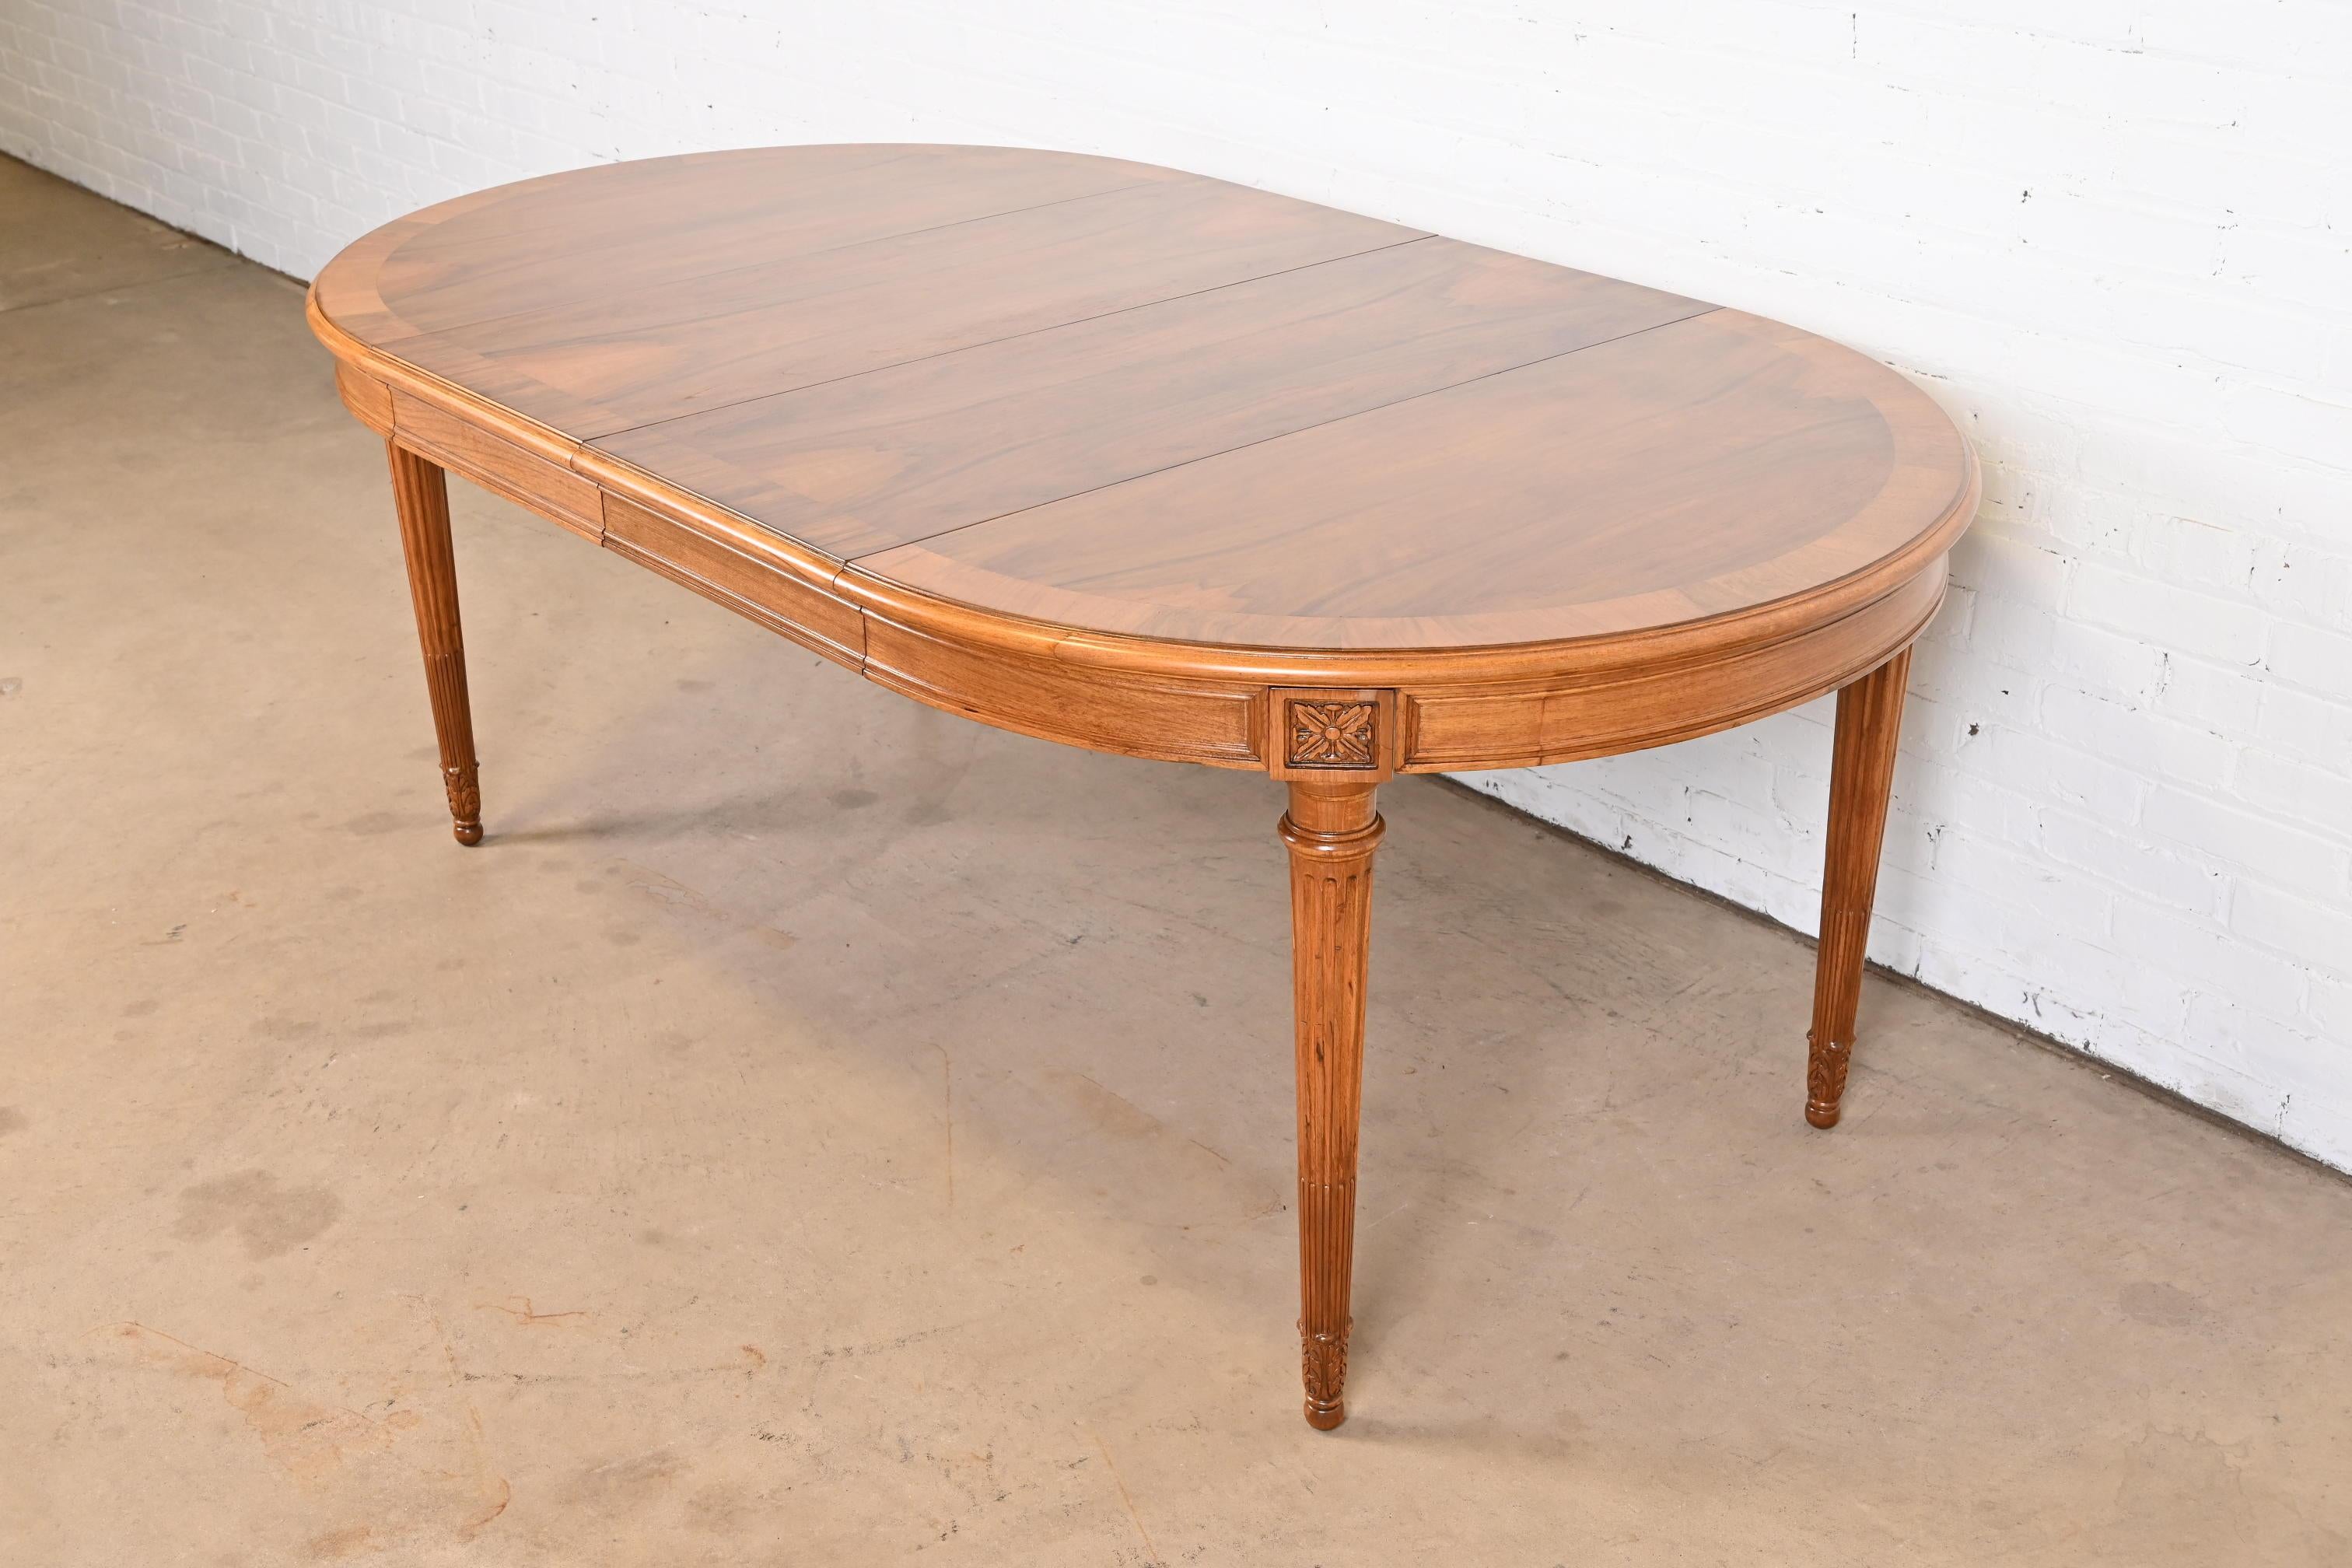 An exceptional French Regency Louis XVI style extension dining table

By Karges Furniture

USA, Circa 1960s

Book-matched banded burled walnut top, with carved solid walnut apron and legs.

Measures: 44